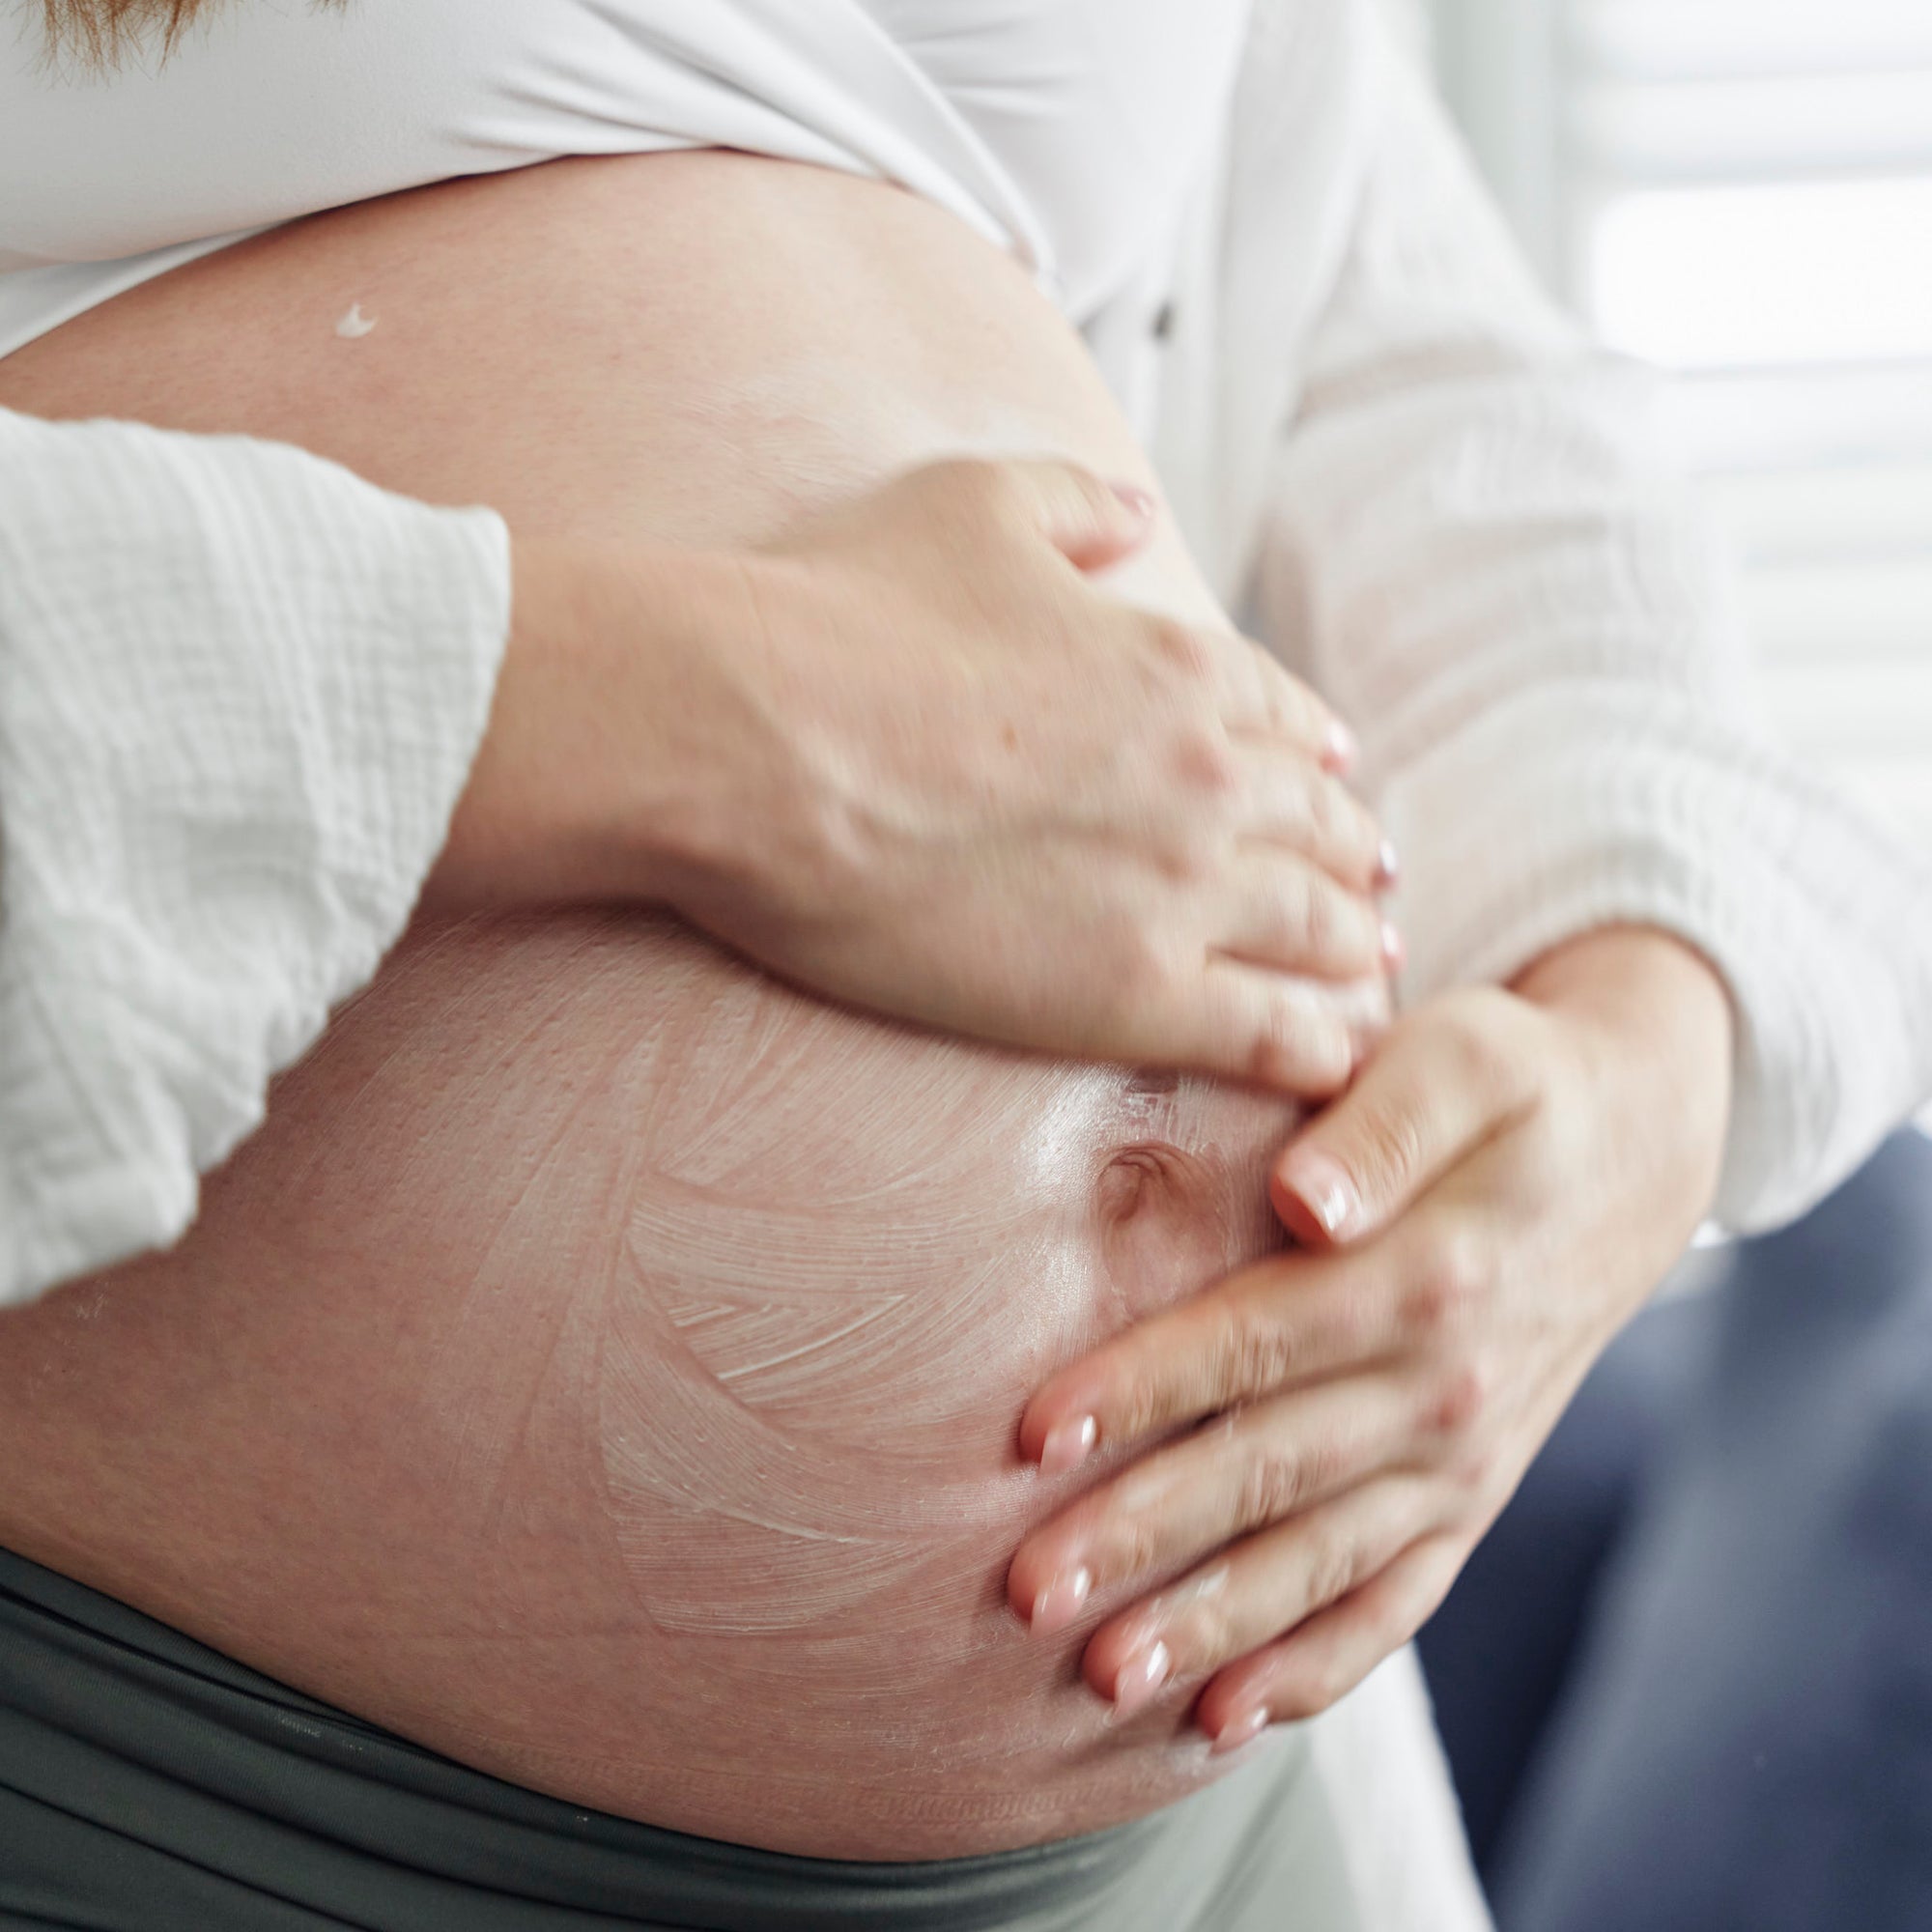 Ten Top Tips for Preventing Stretch Marks During Pregnancy